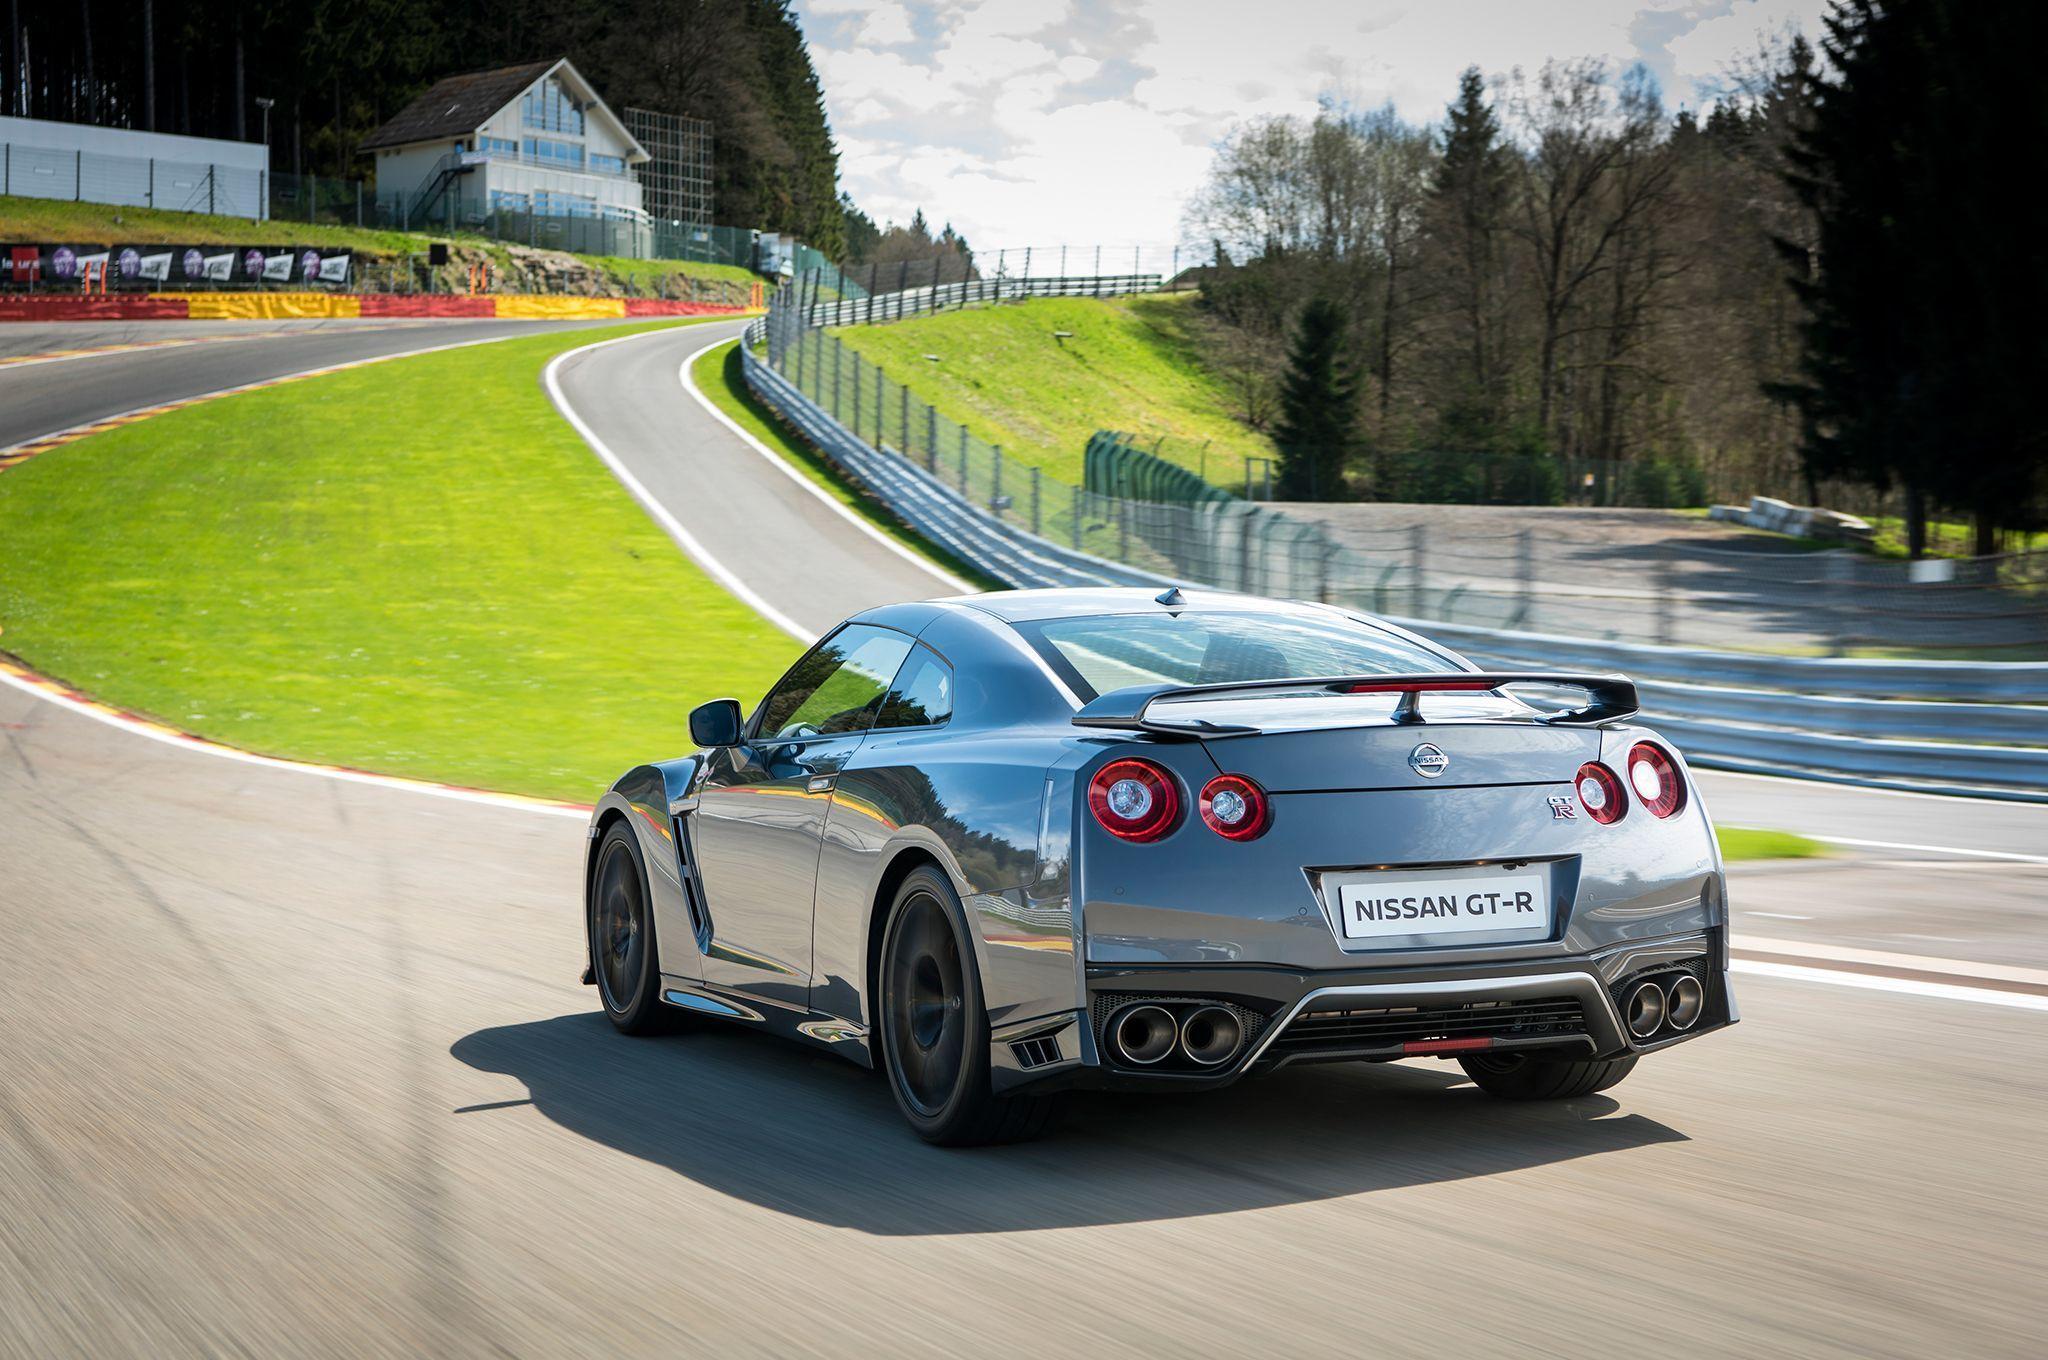 Nissan GT R Starting Price Jumps To $585